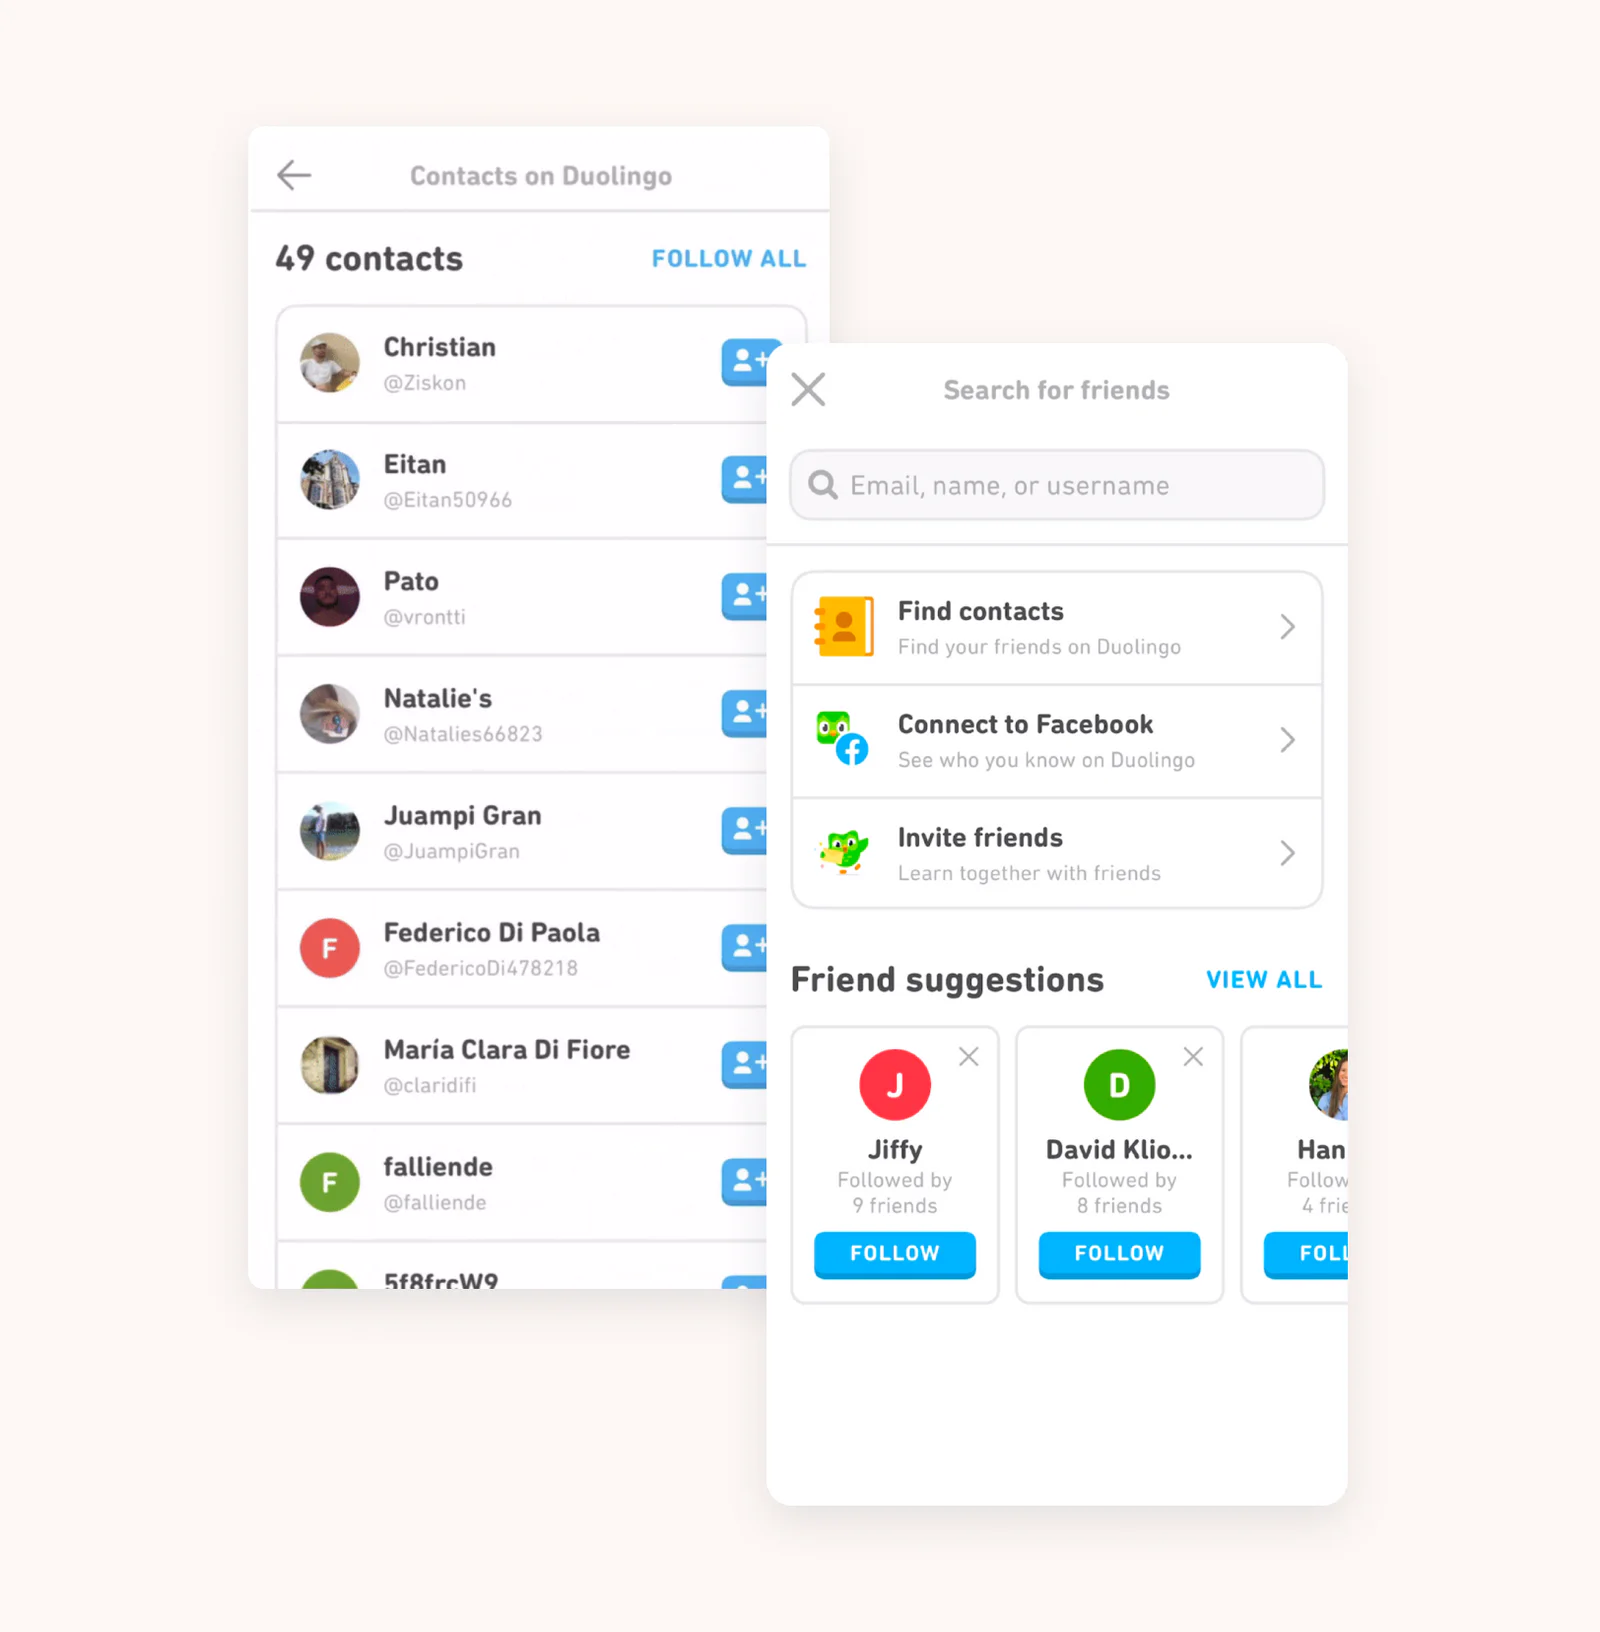 duolingo UI showing social interactions and connections to different communication platforms